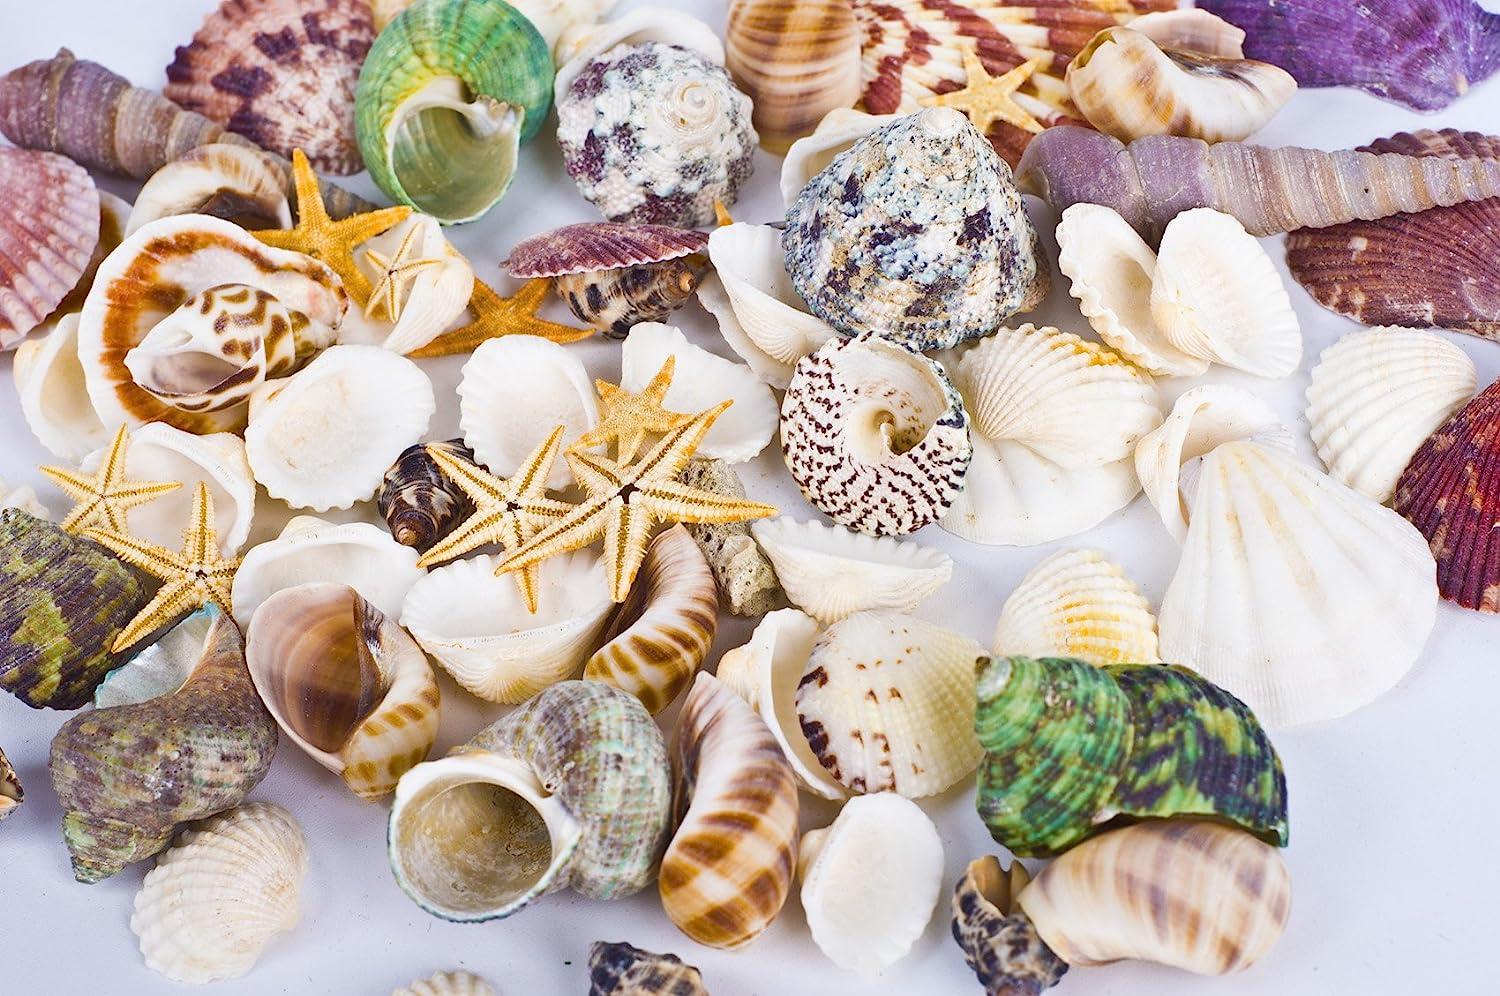 Famoby Sea Shells Mixed Beach Seashells Starfish for Beach Theme Party  Wedding Decorations DIY Crafts Candle Making Fish Tank Vase Fillers Home Decorations  Supplies 70+ pcs